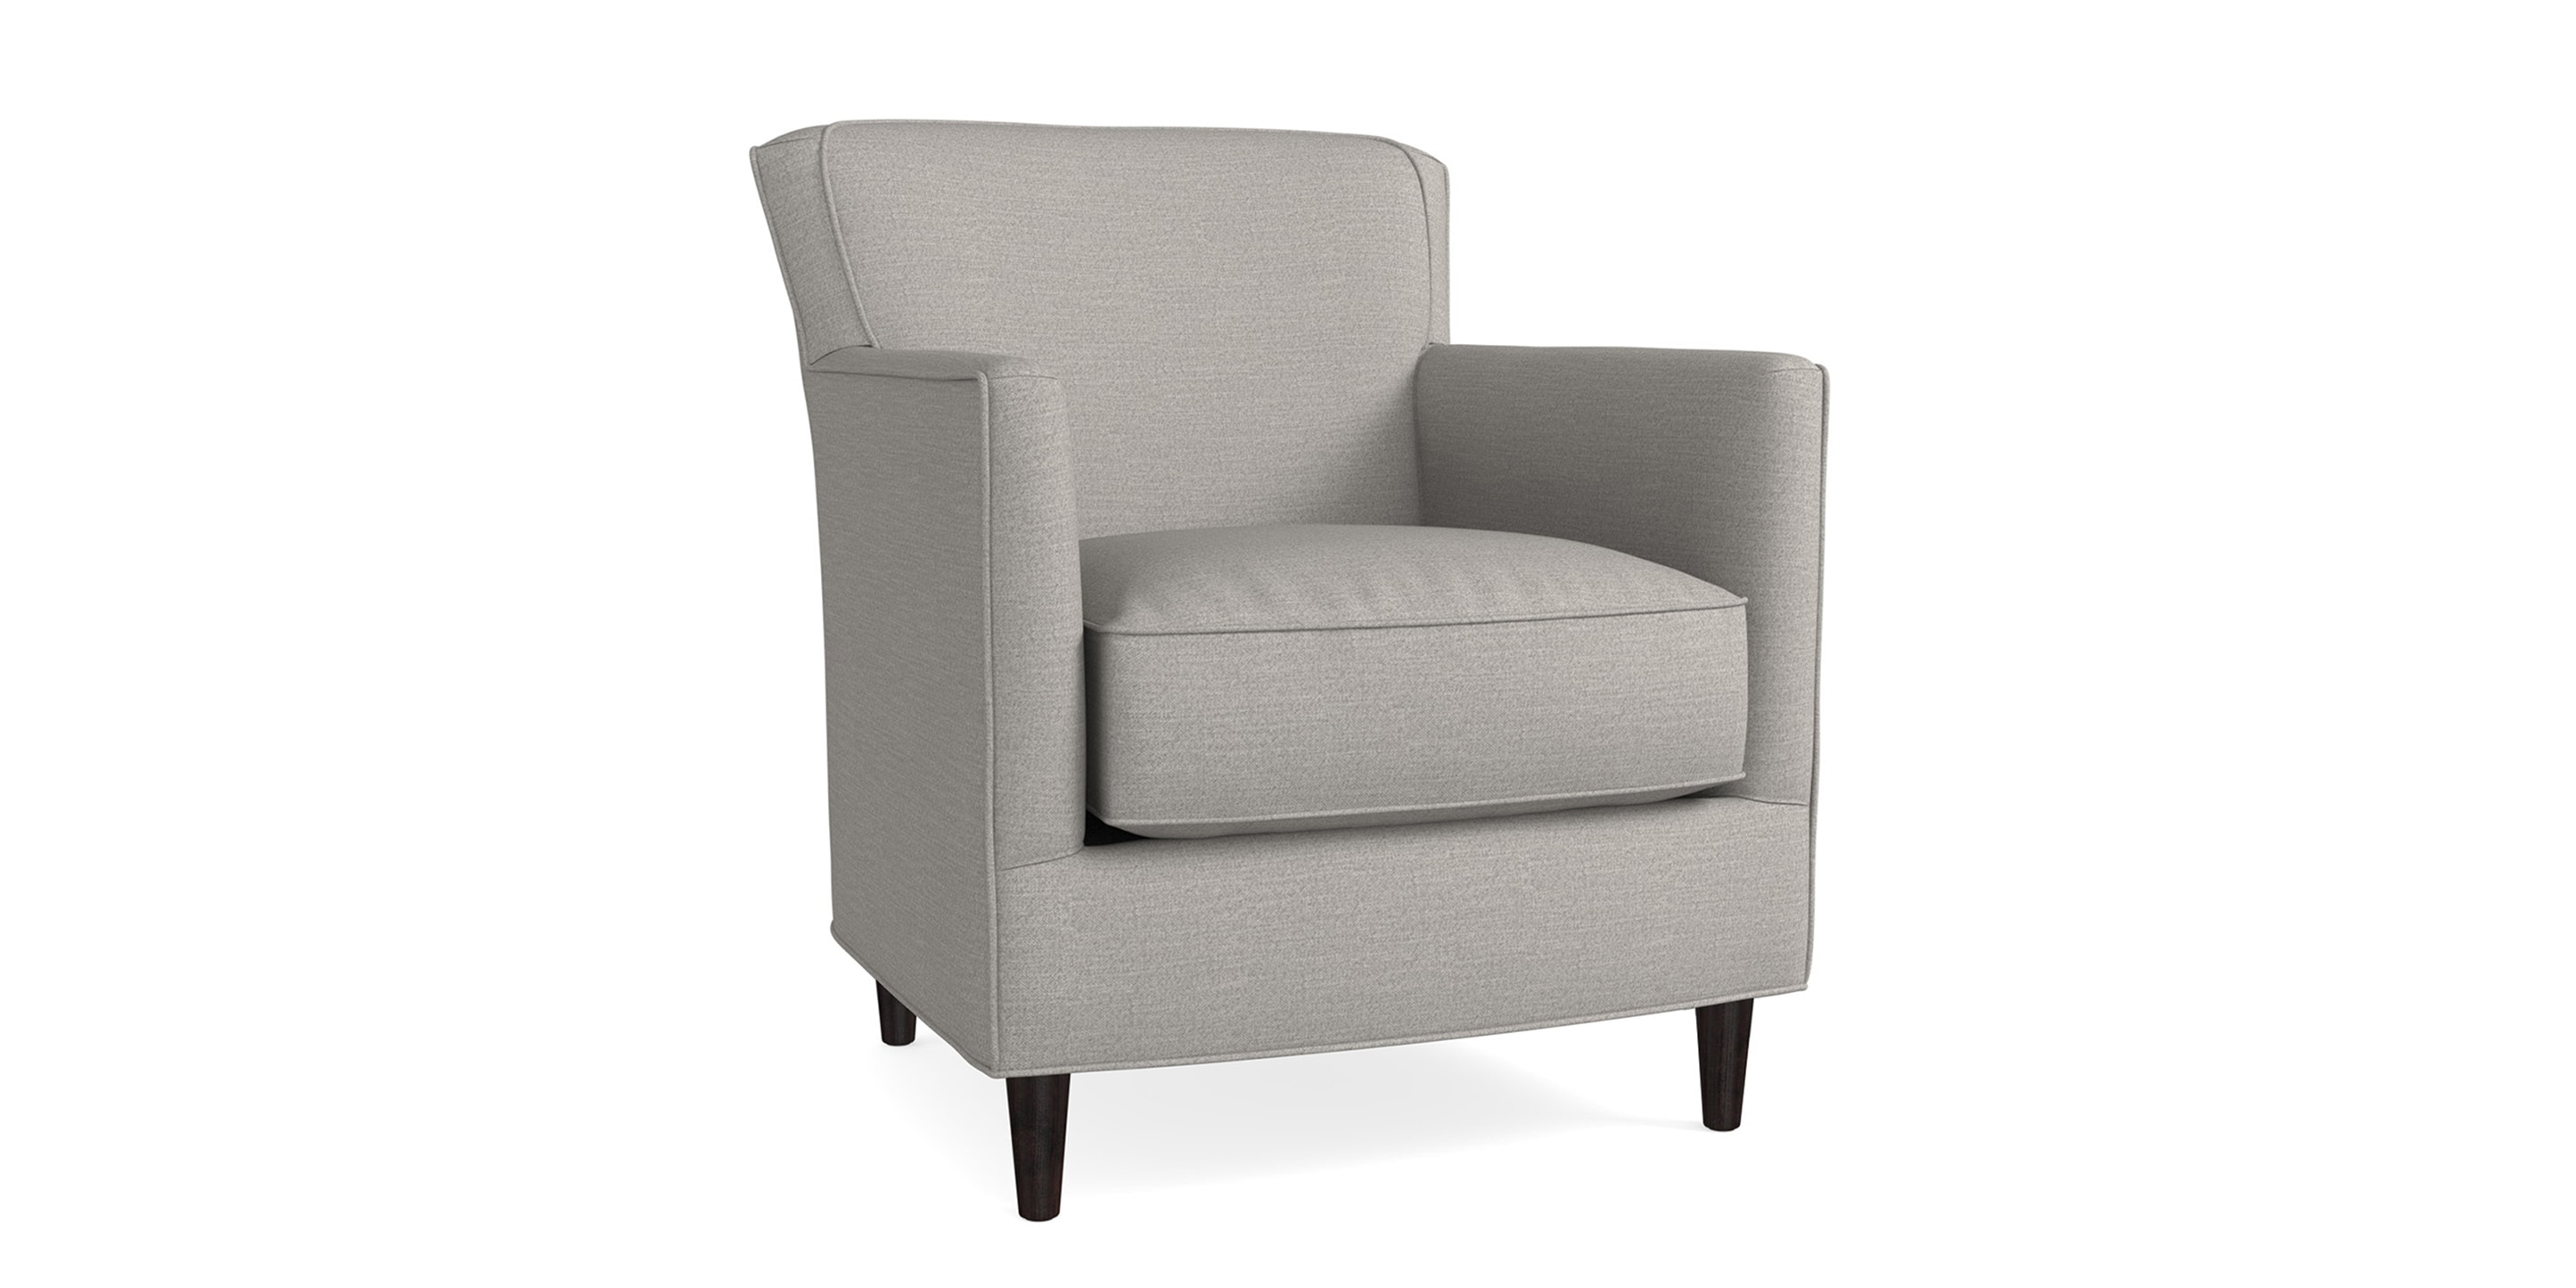 New American Living Accent Chair